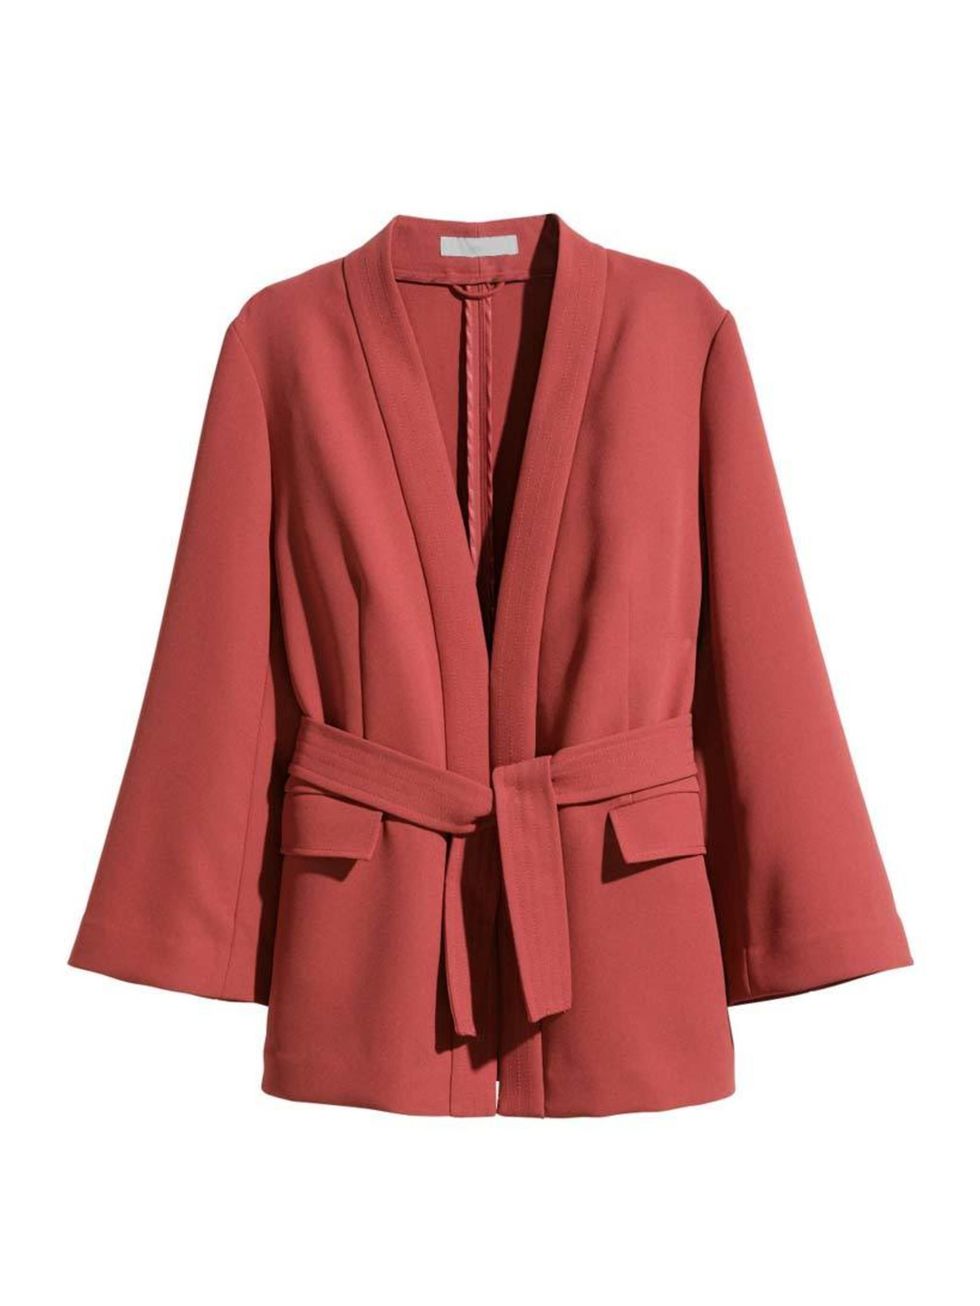 <p>This season's jacket is nipped in at the waist with a sash - we're calling it the 'judo belt'.</p>

<p><a href="http://www.hm.com/gb/product/89156?article=89156-A" target="_blank">H&M</a> jacket, £39.99</p>